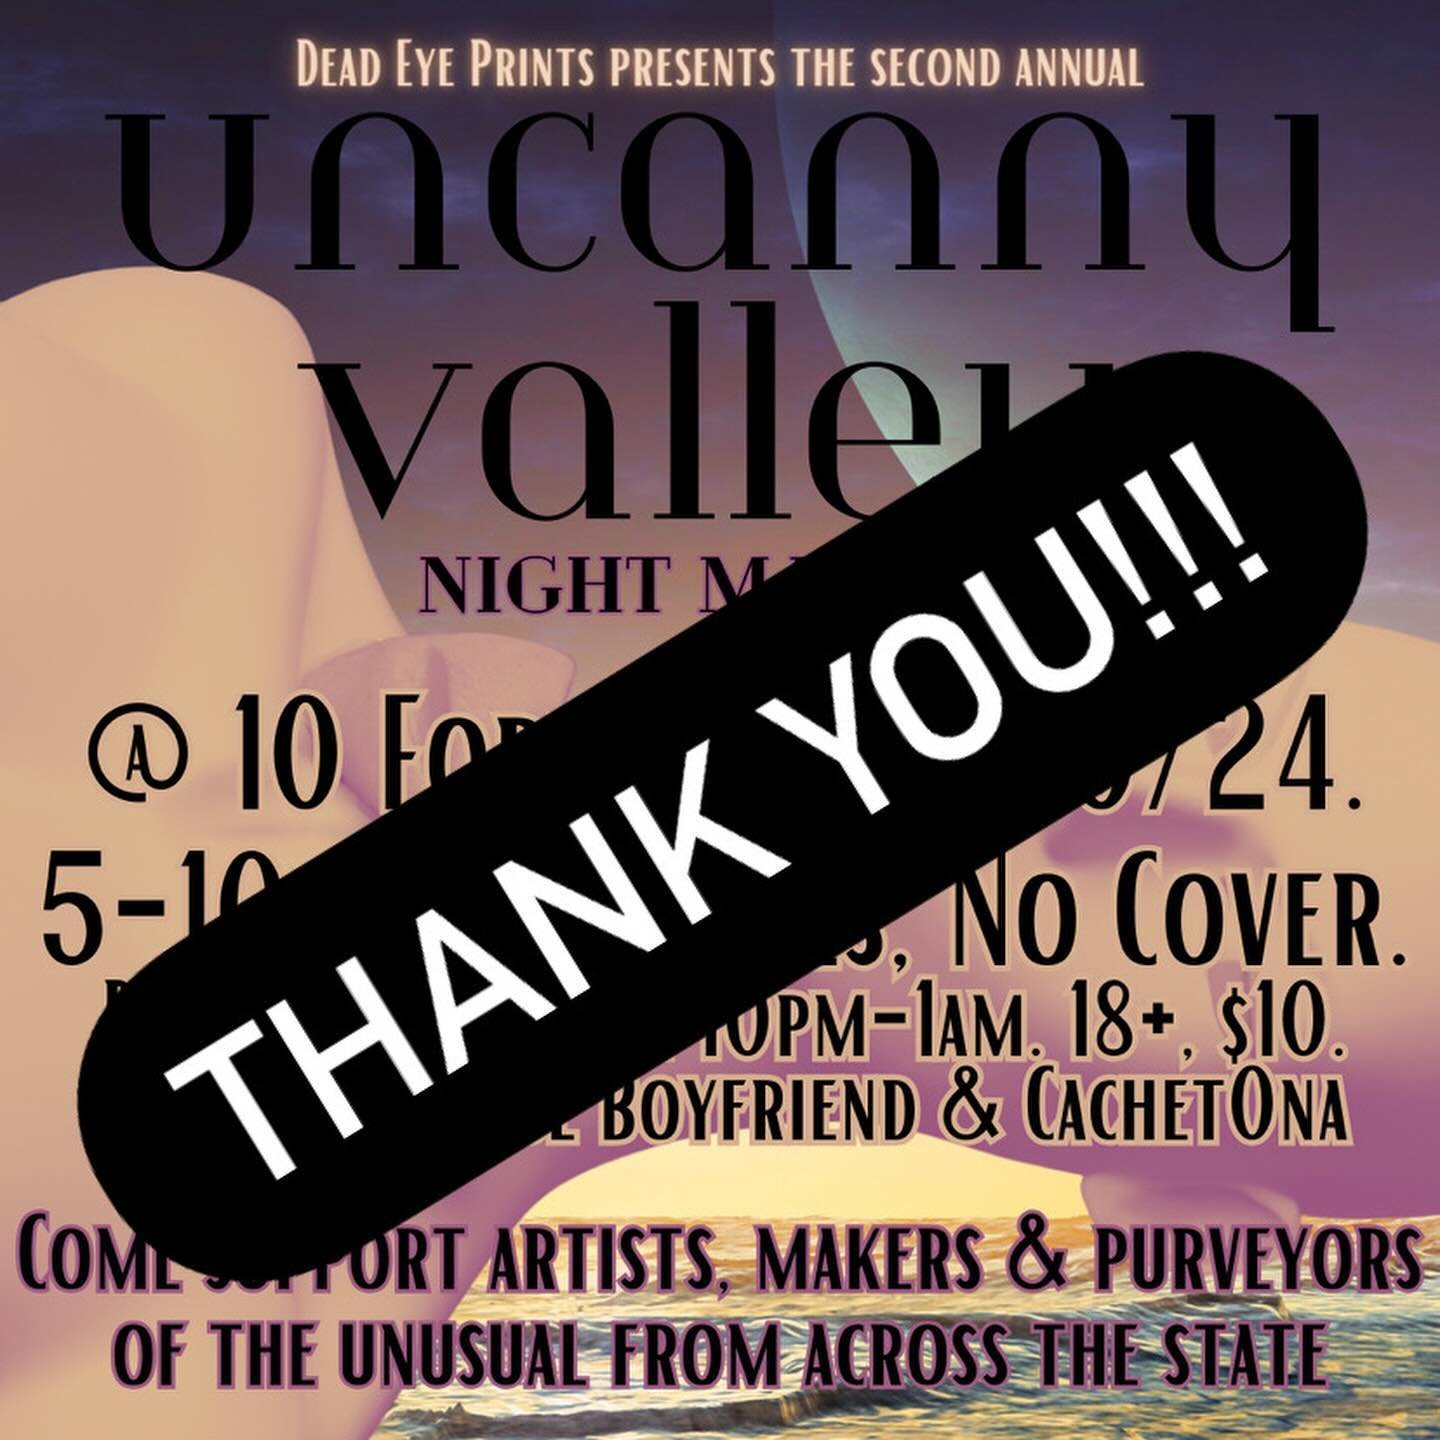 THANK YOU!!!

the second-ever Uncanny Valley and first-ever night market edition was so gd wonderful. this night was only possible because of all the fantastic vendors, @10.forward, @lookielucas on the bar, the DJs @bux_wild, @virgocachet0na, and @ha